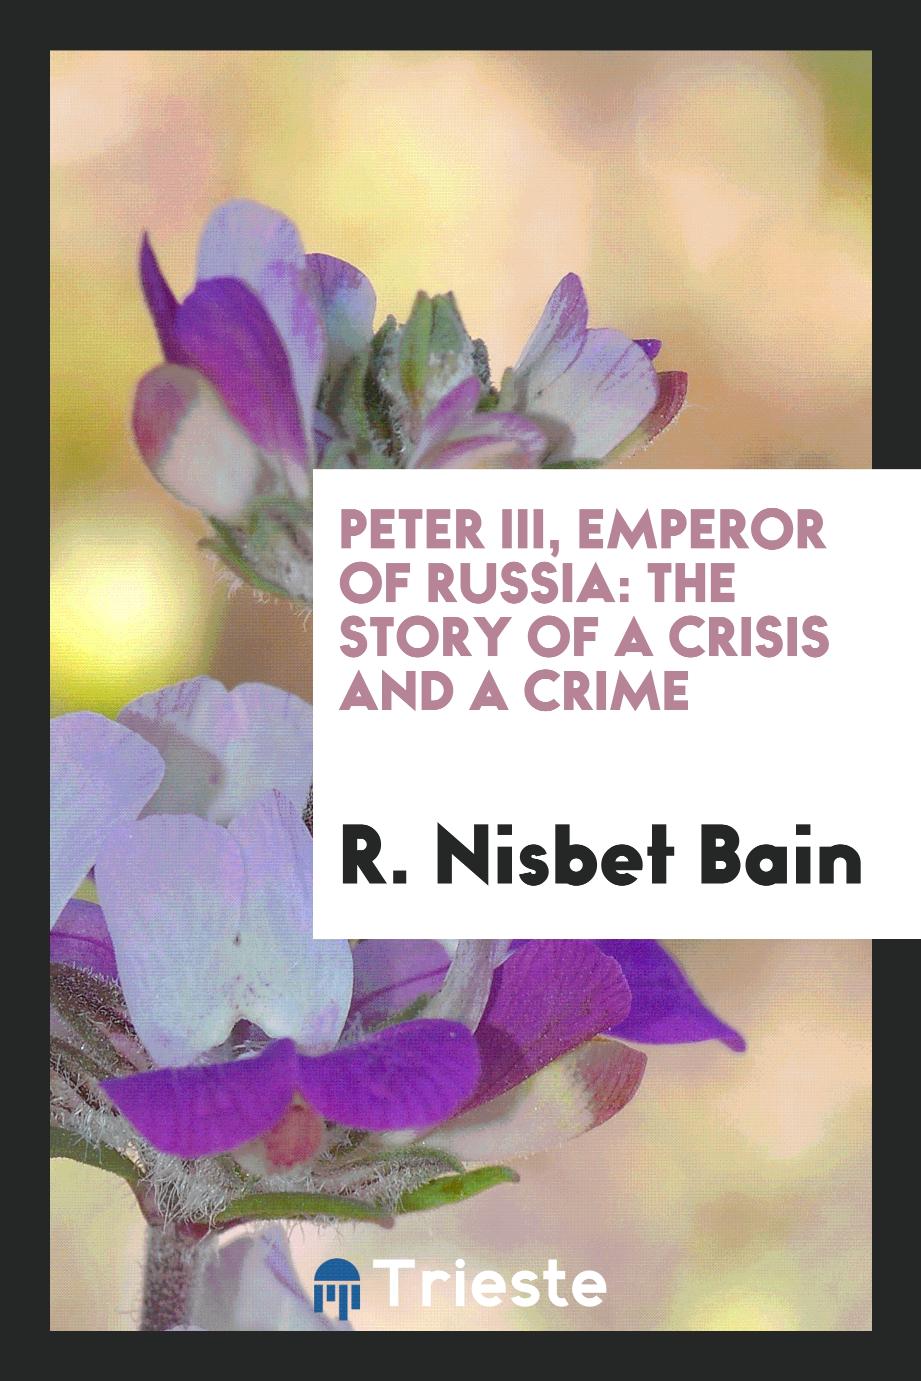 Peter III, Emperor of Russia: The Story of a Crisis and a Crime